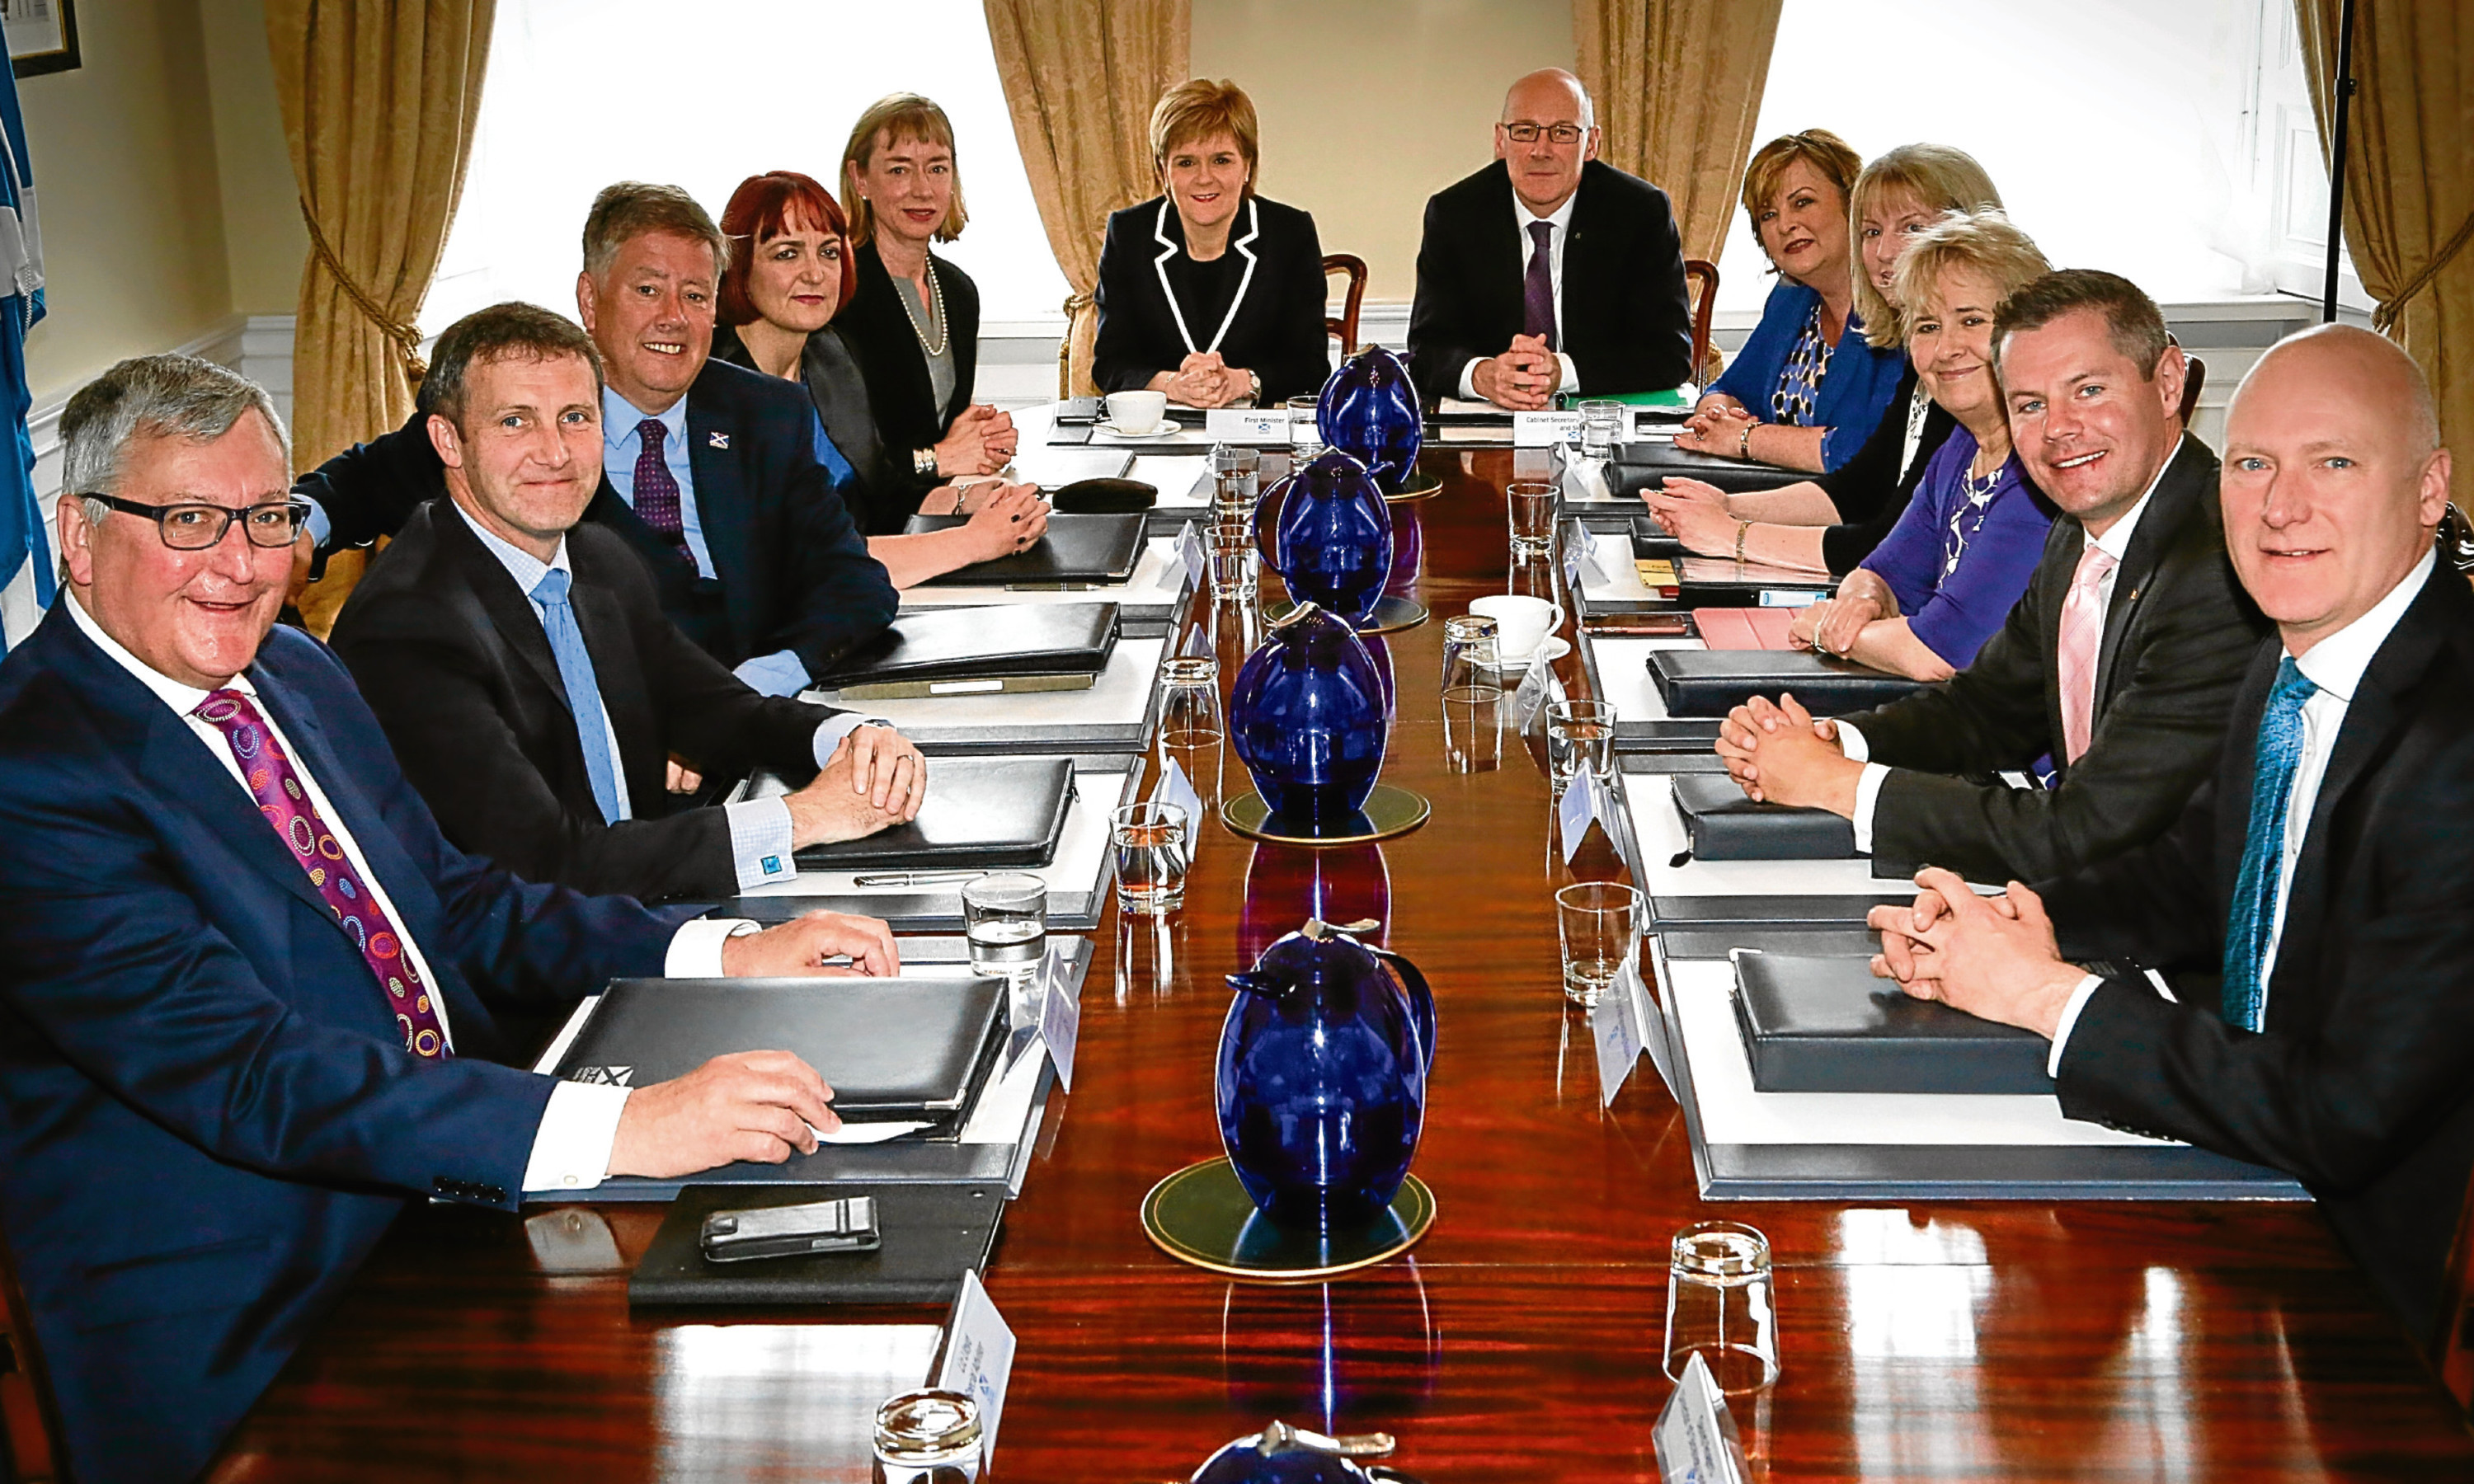 The Scottish Cabinet meets up. Alex is worried that power in the SNP lies only with a chosen few.